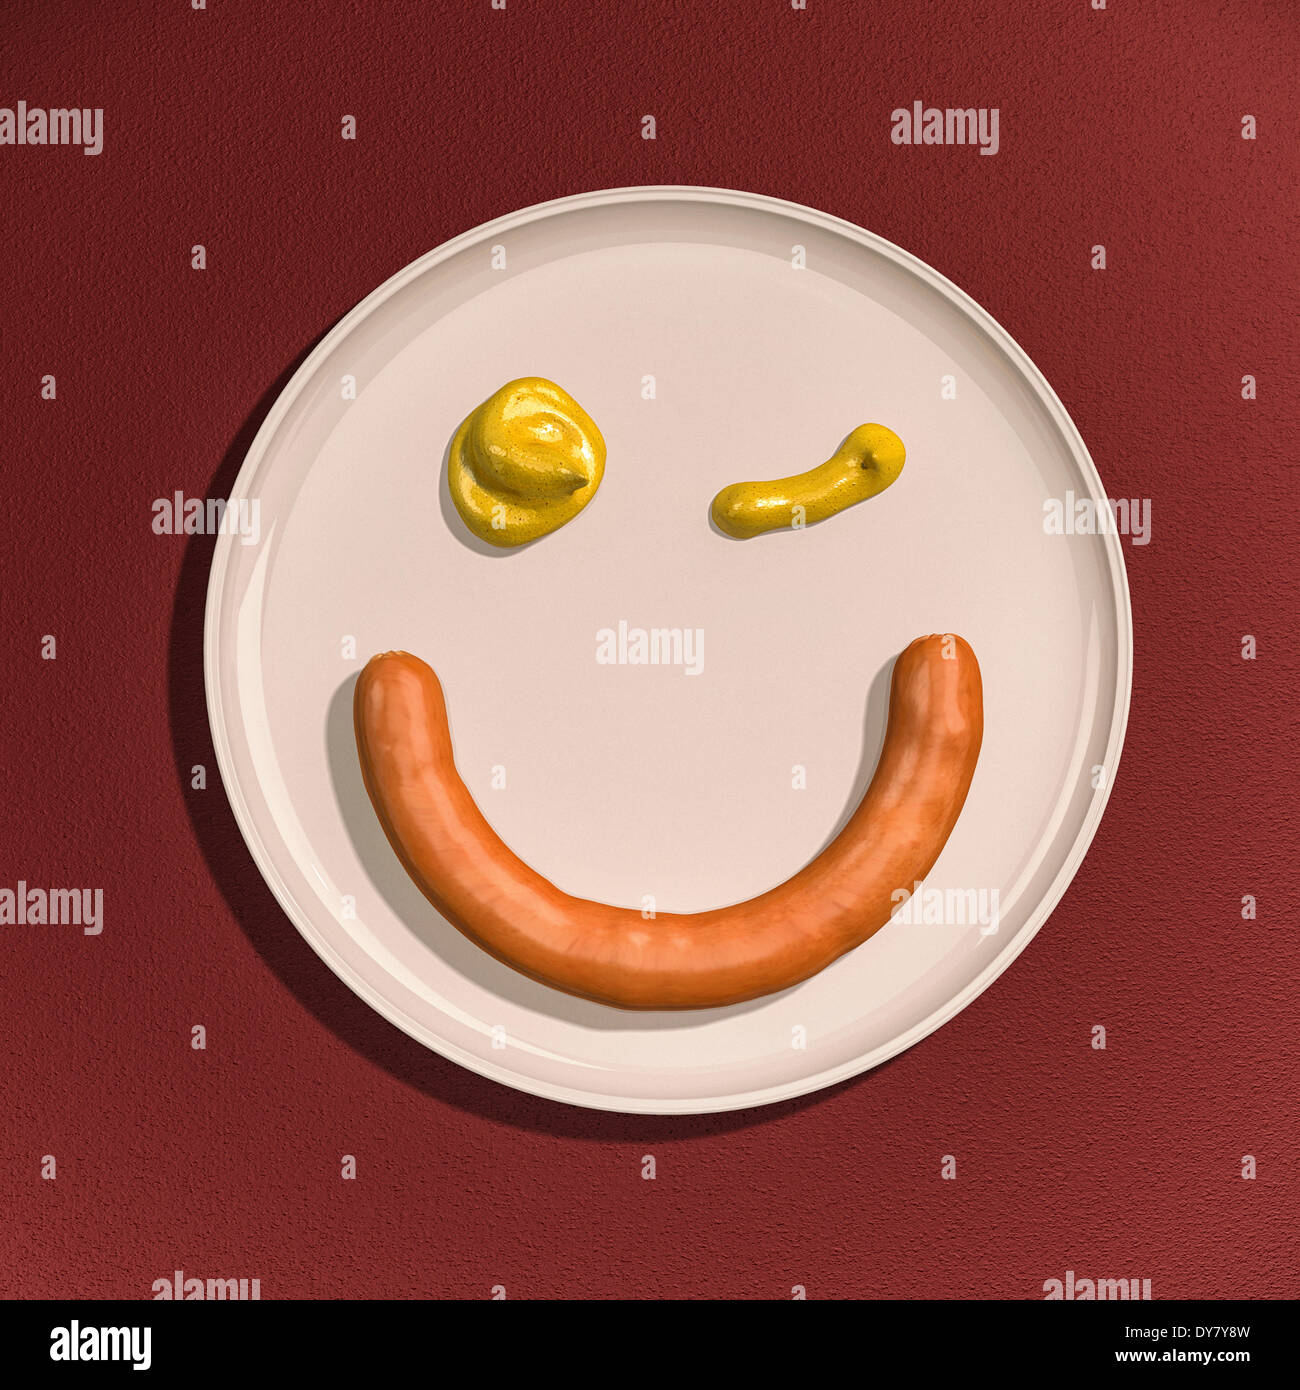 Download Sausage And Drops Of Mustard Winking Smiley Face On A Plate Stock Photo Alamy Yellowimages Mockups